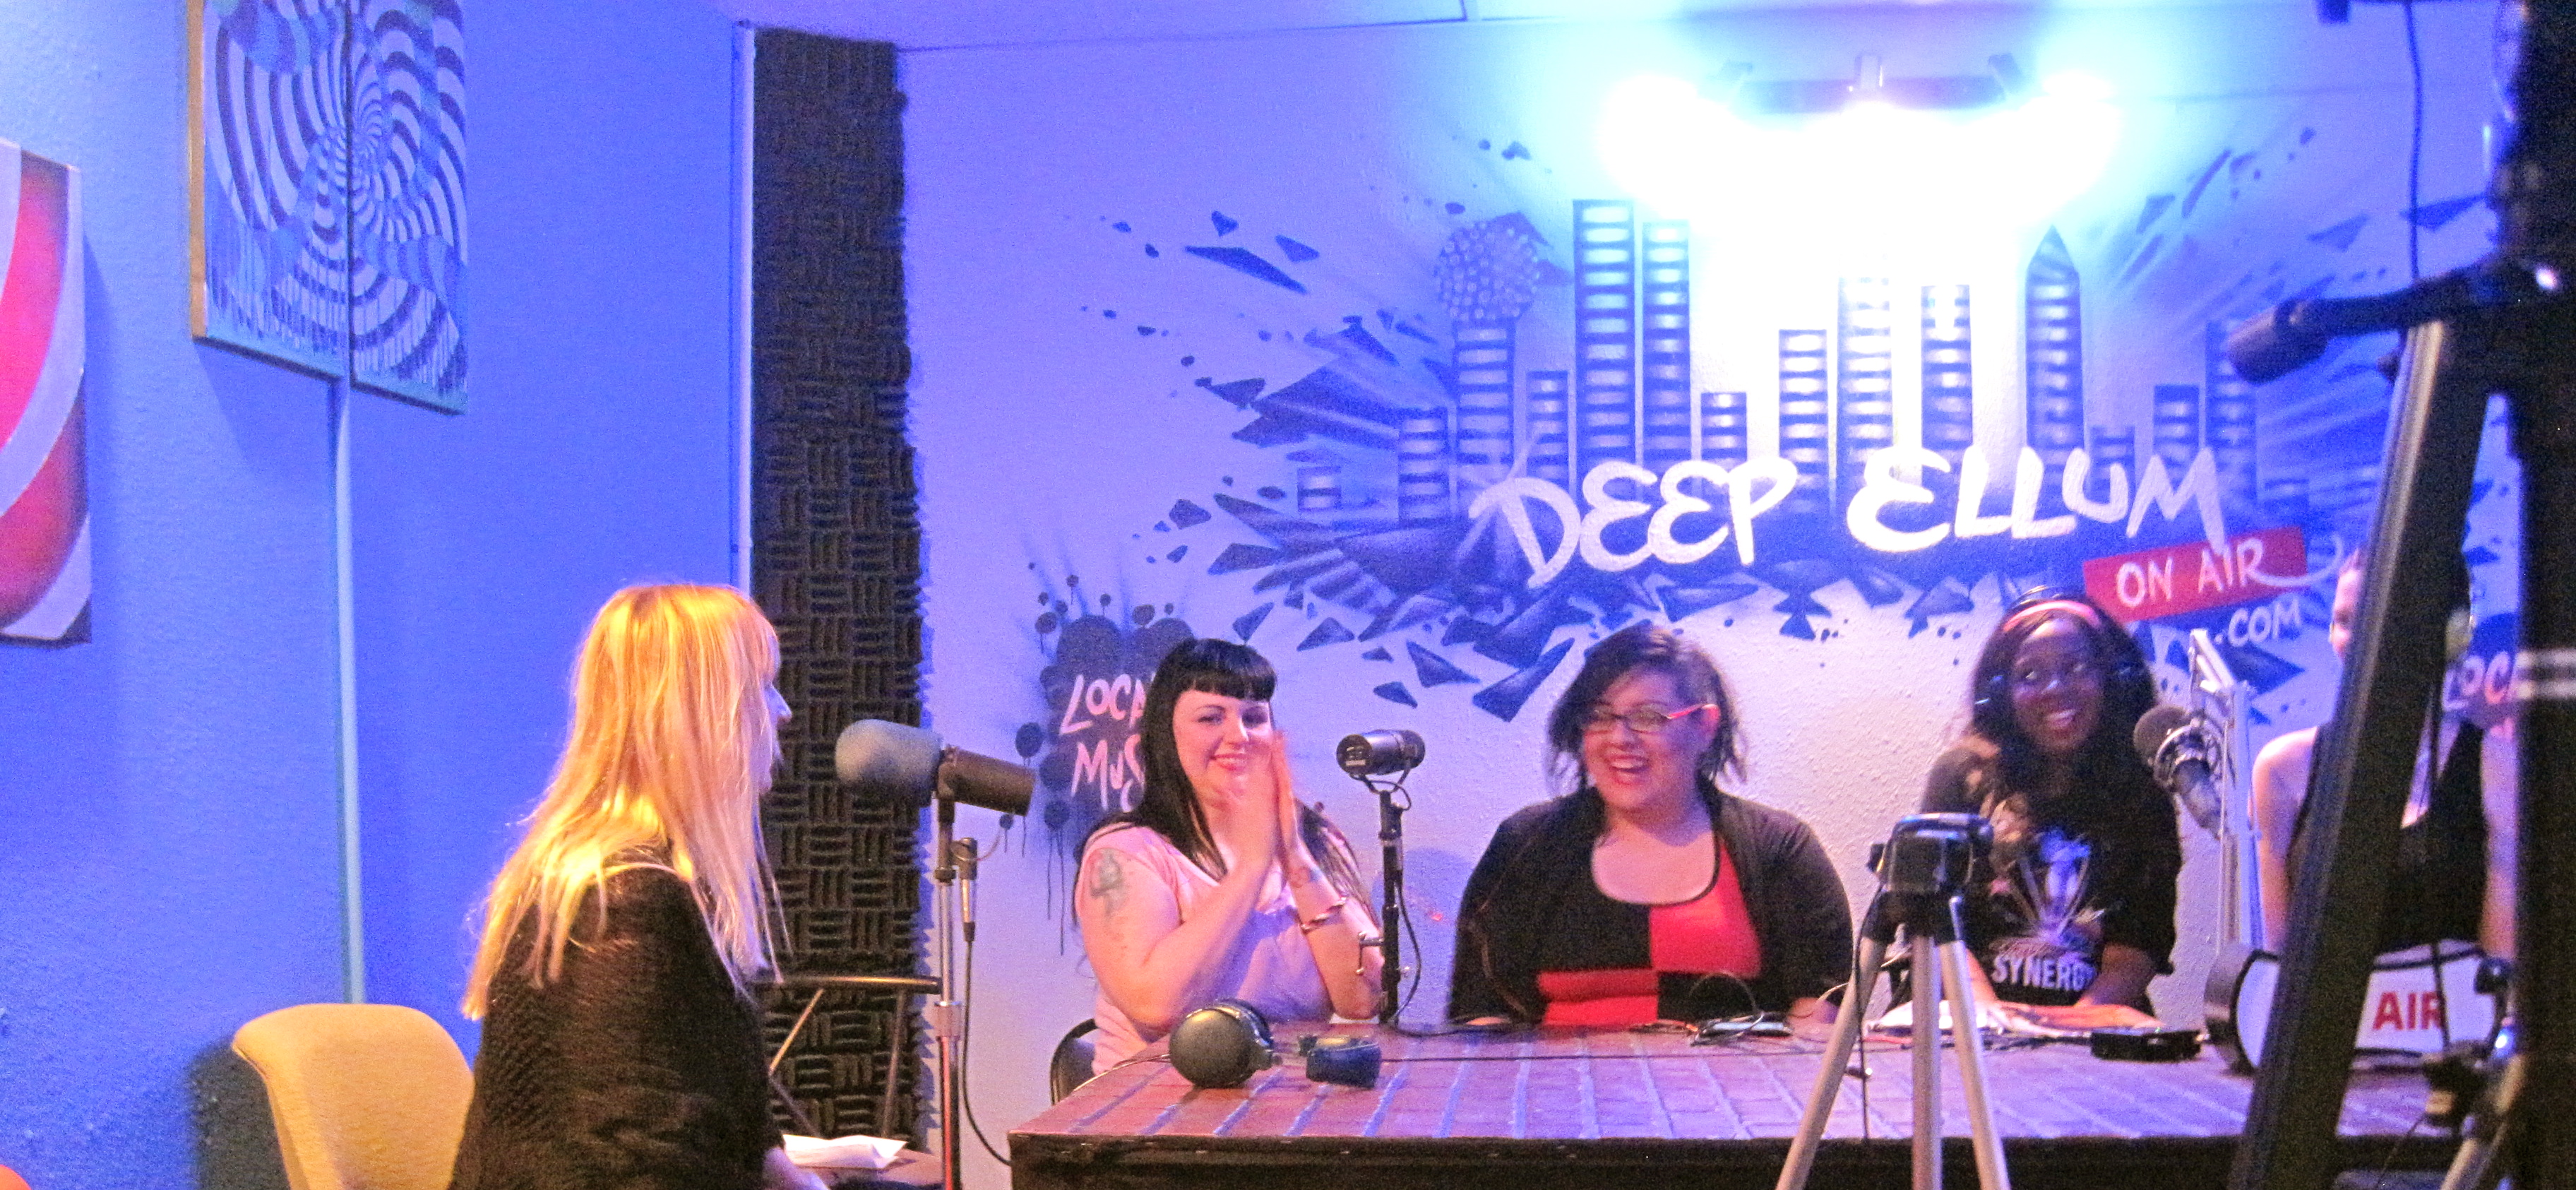 2013 Dallas girls of the roundtable Interview for Jem and the holograms